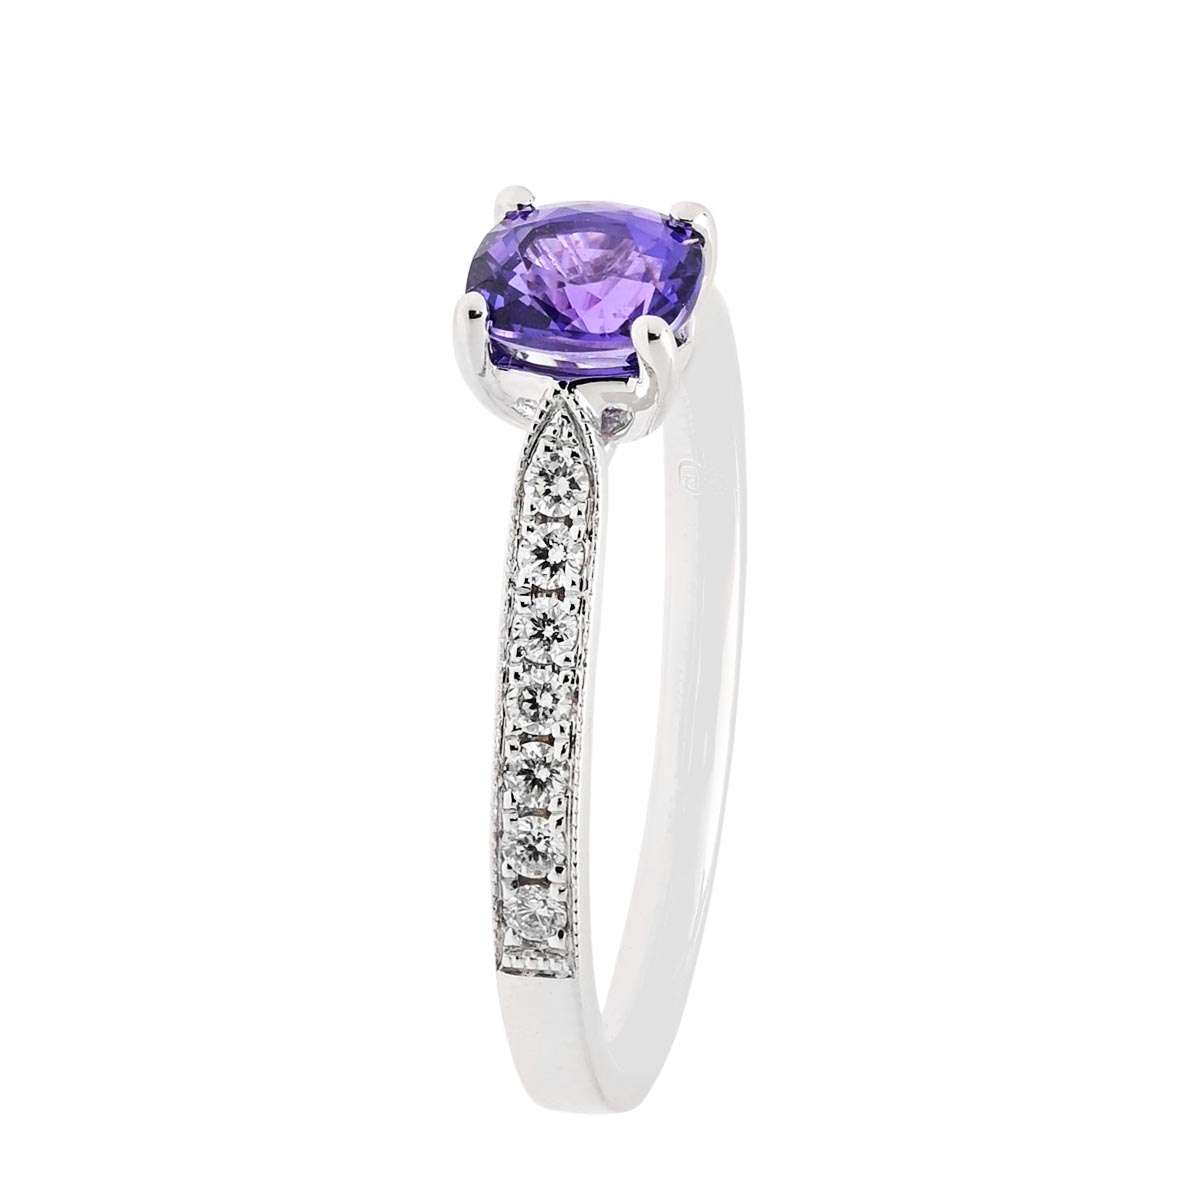 Cushion Cut Purple Sapphire Ring in 18kt White Gold with Diamonds (1/5ct tw)